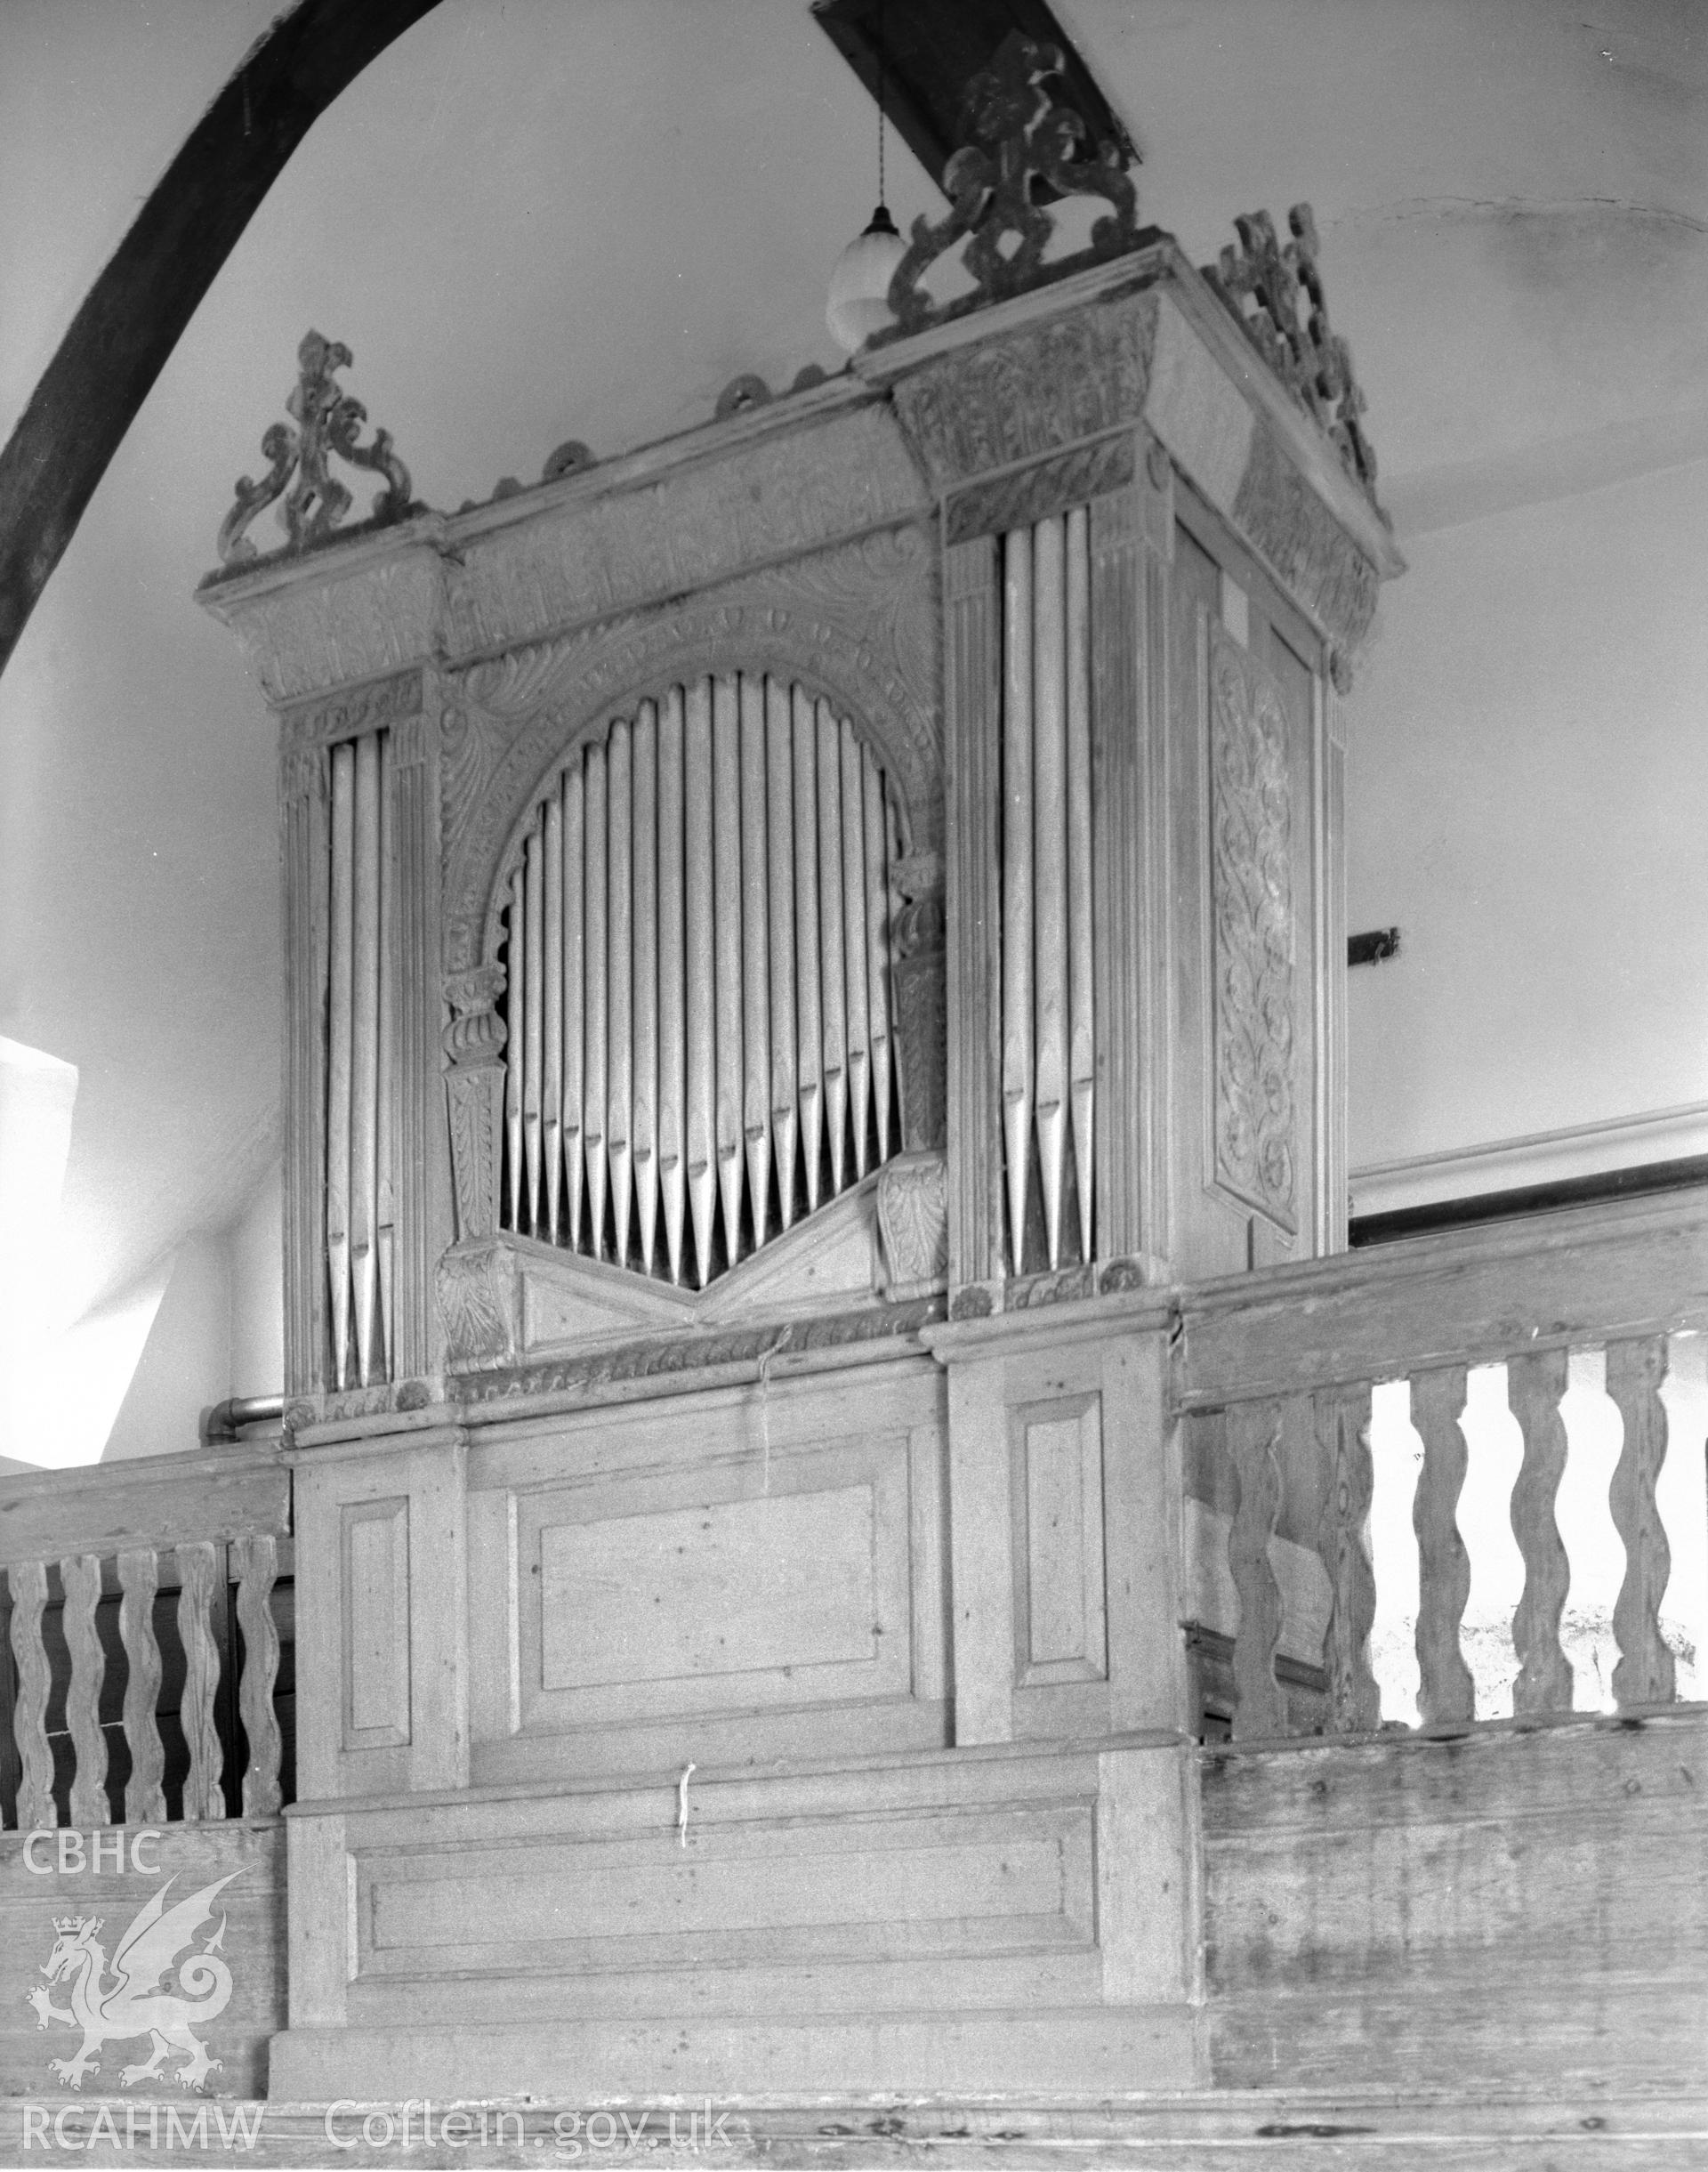 Interior view showing the barrel organ from the east.